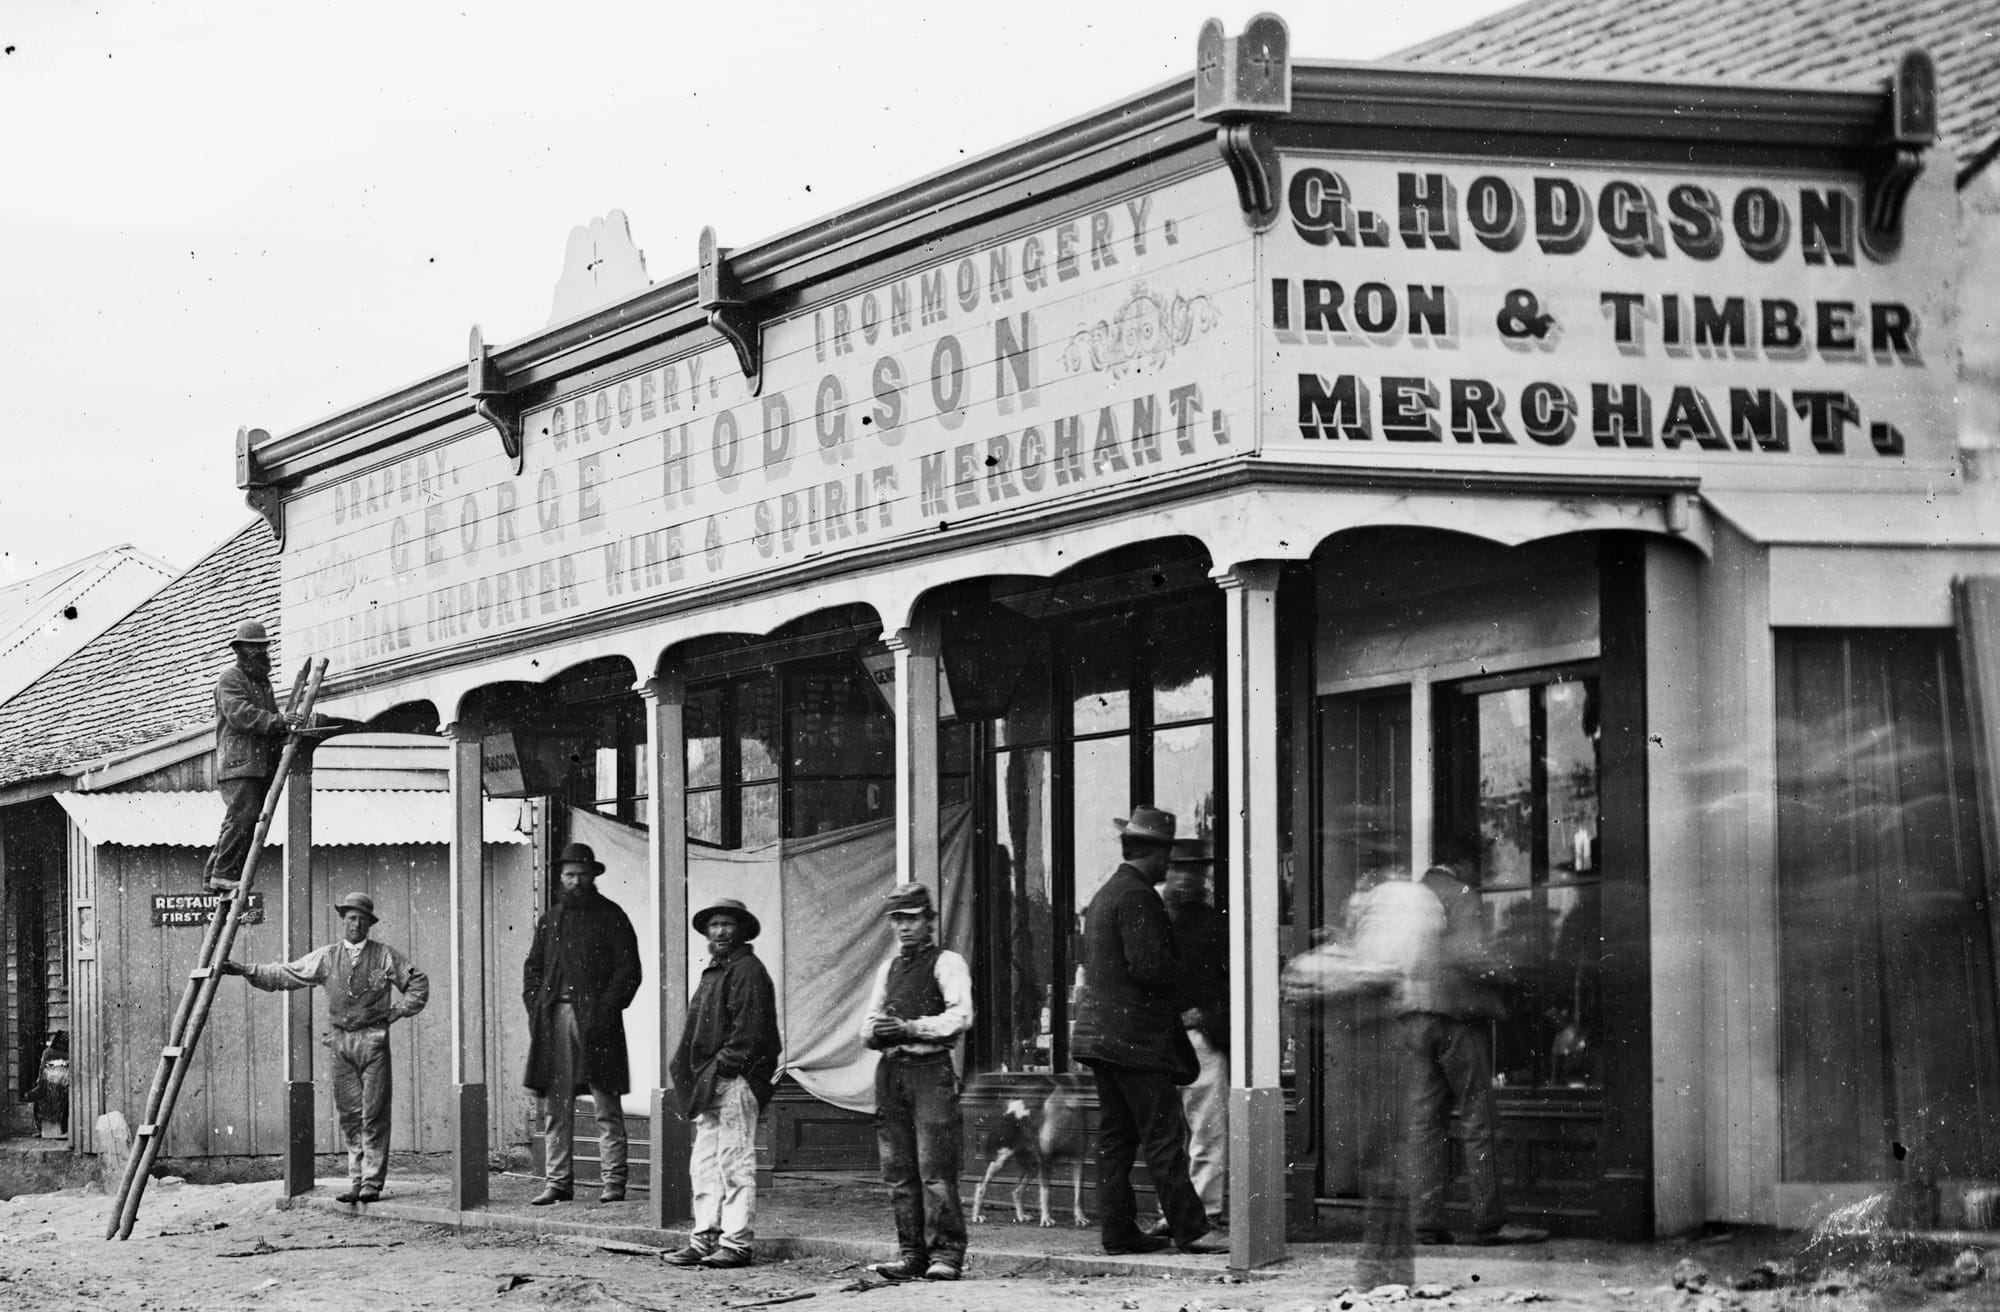 Large timber building housing George Hodgson's shop selling various goods. Men are posing in front, including one up a ladder painting a sign on the frontage.